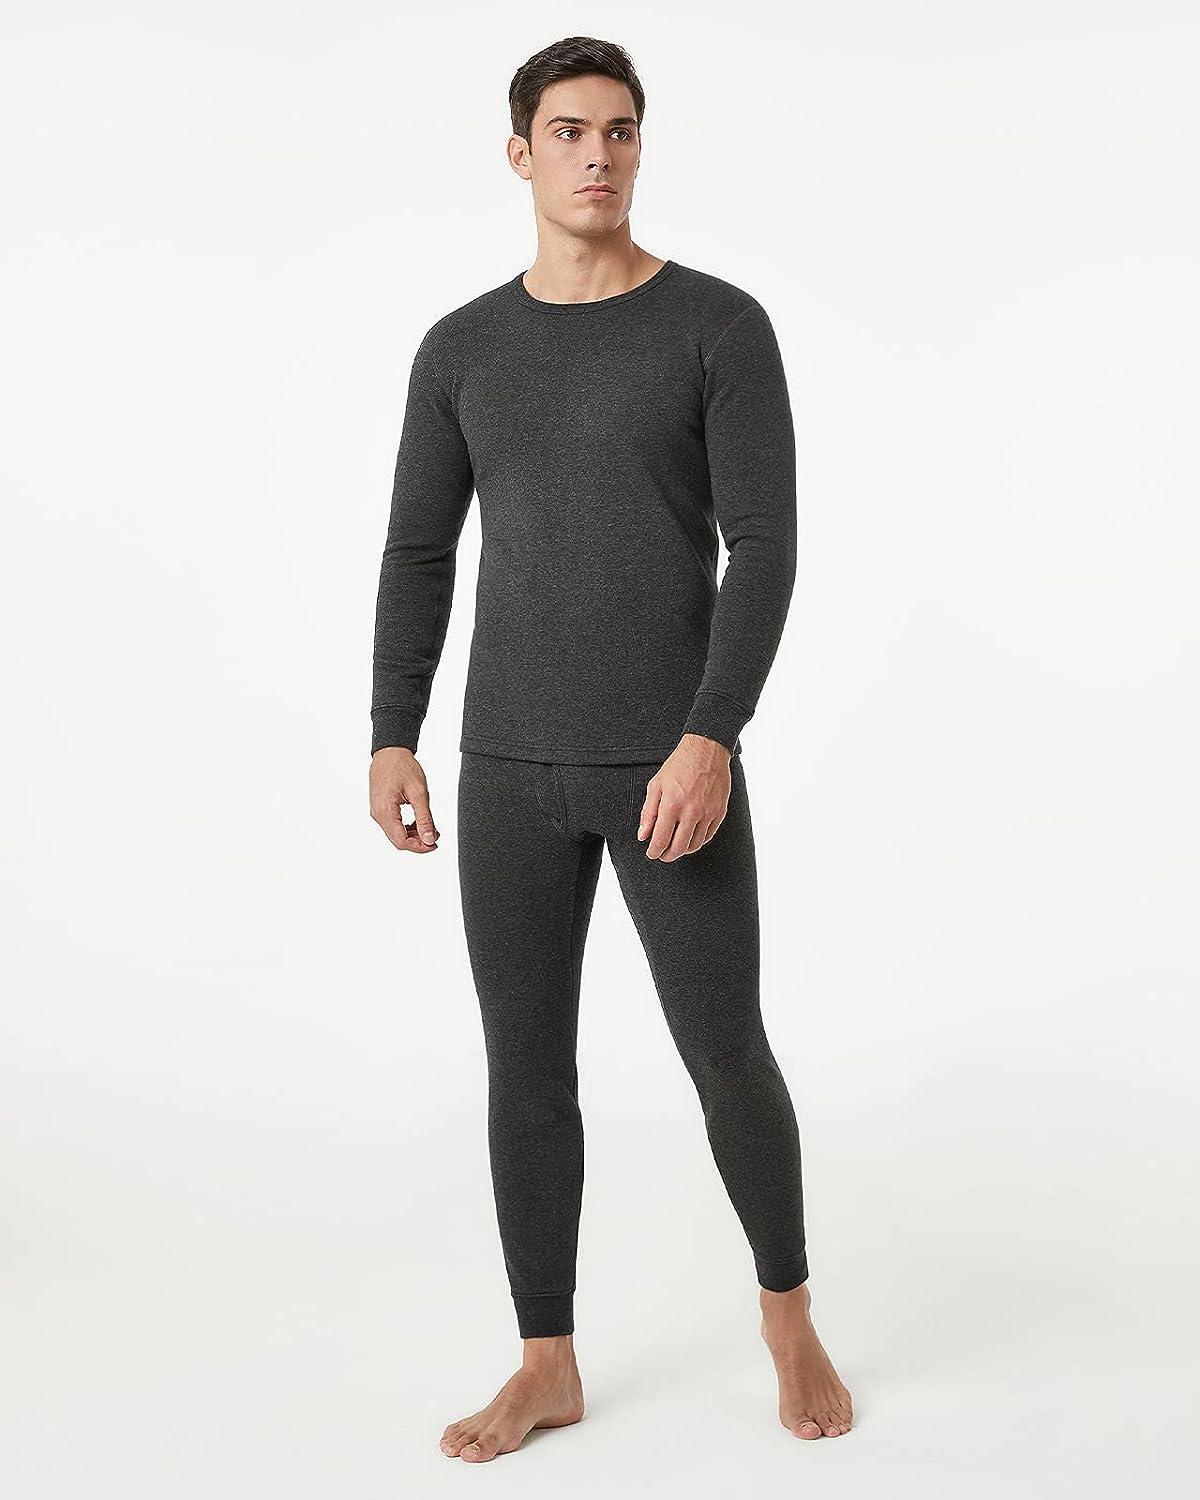 Mens Thermal Underwear Set Extreme Cold Base Layer Set for Thermal